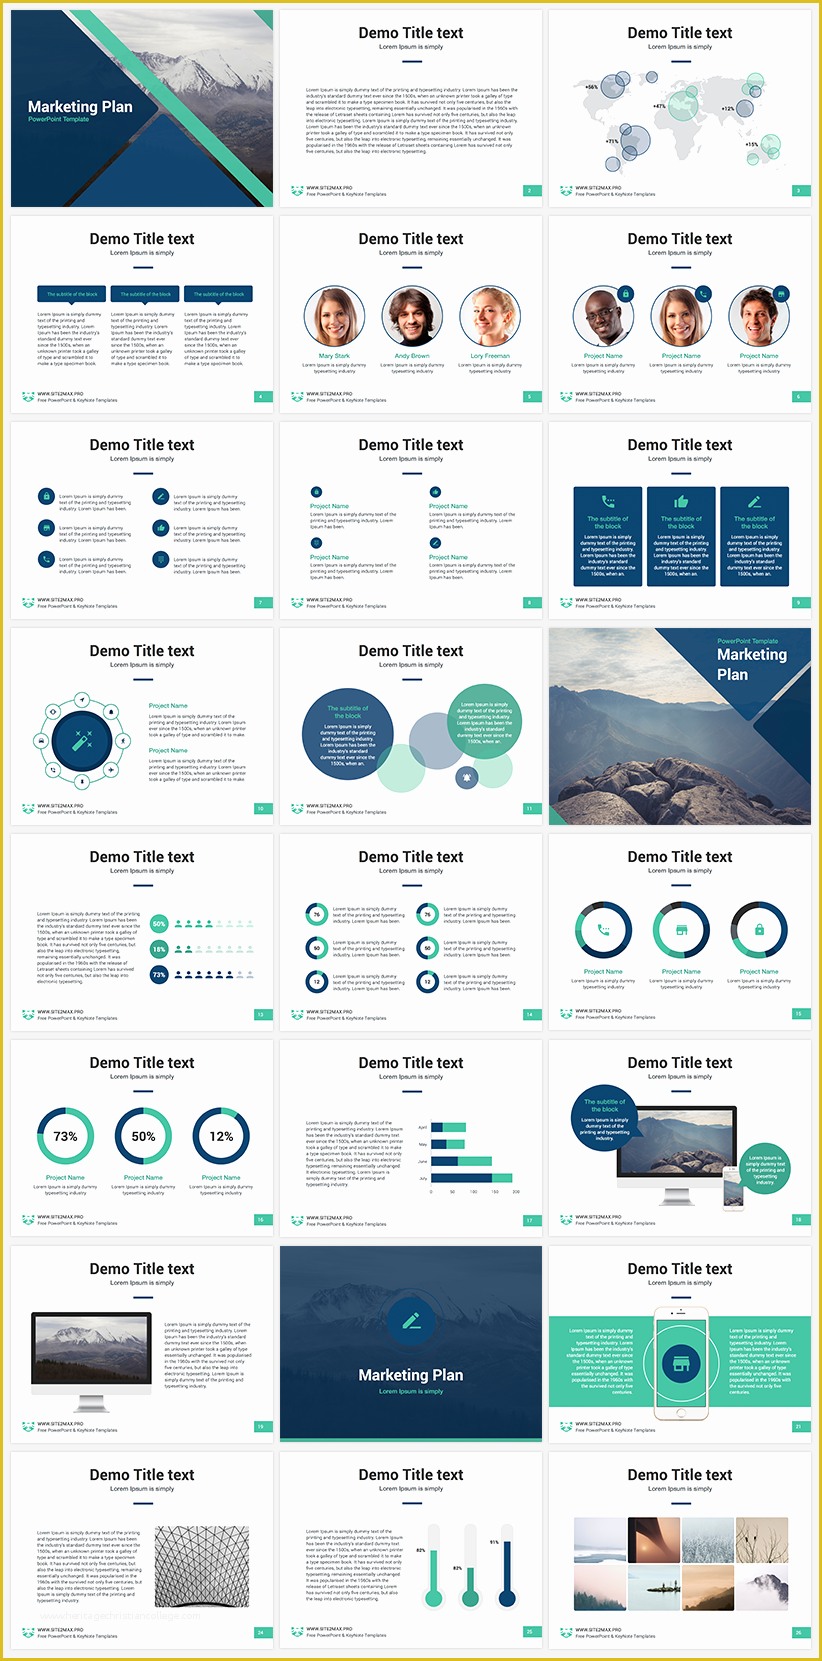 Best Free Business Powerpoint Templates Of the Best 8 Free Powerpoint Templates